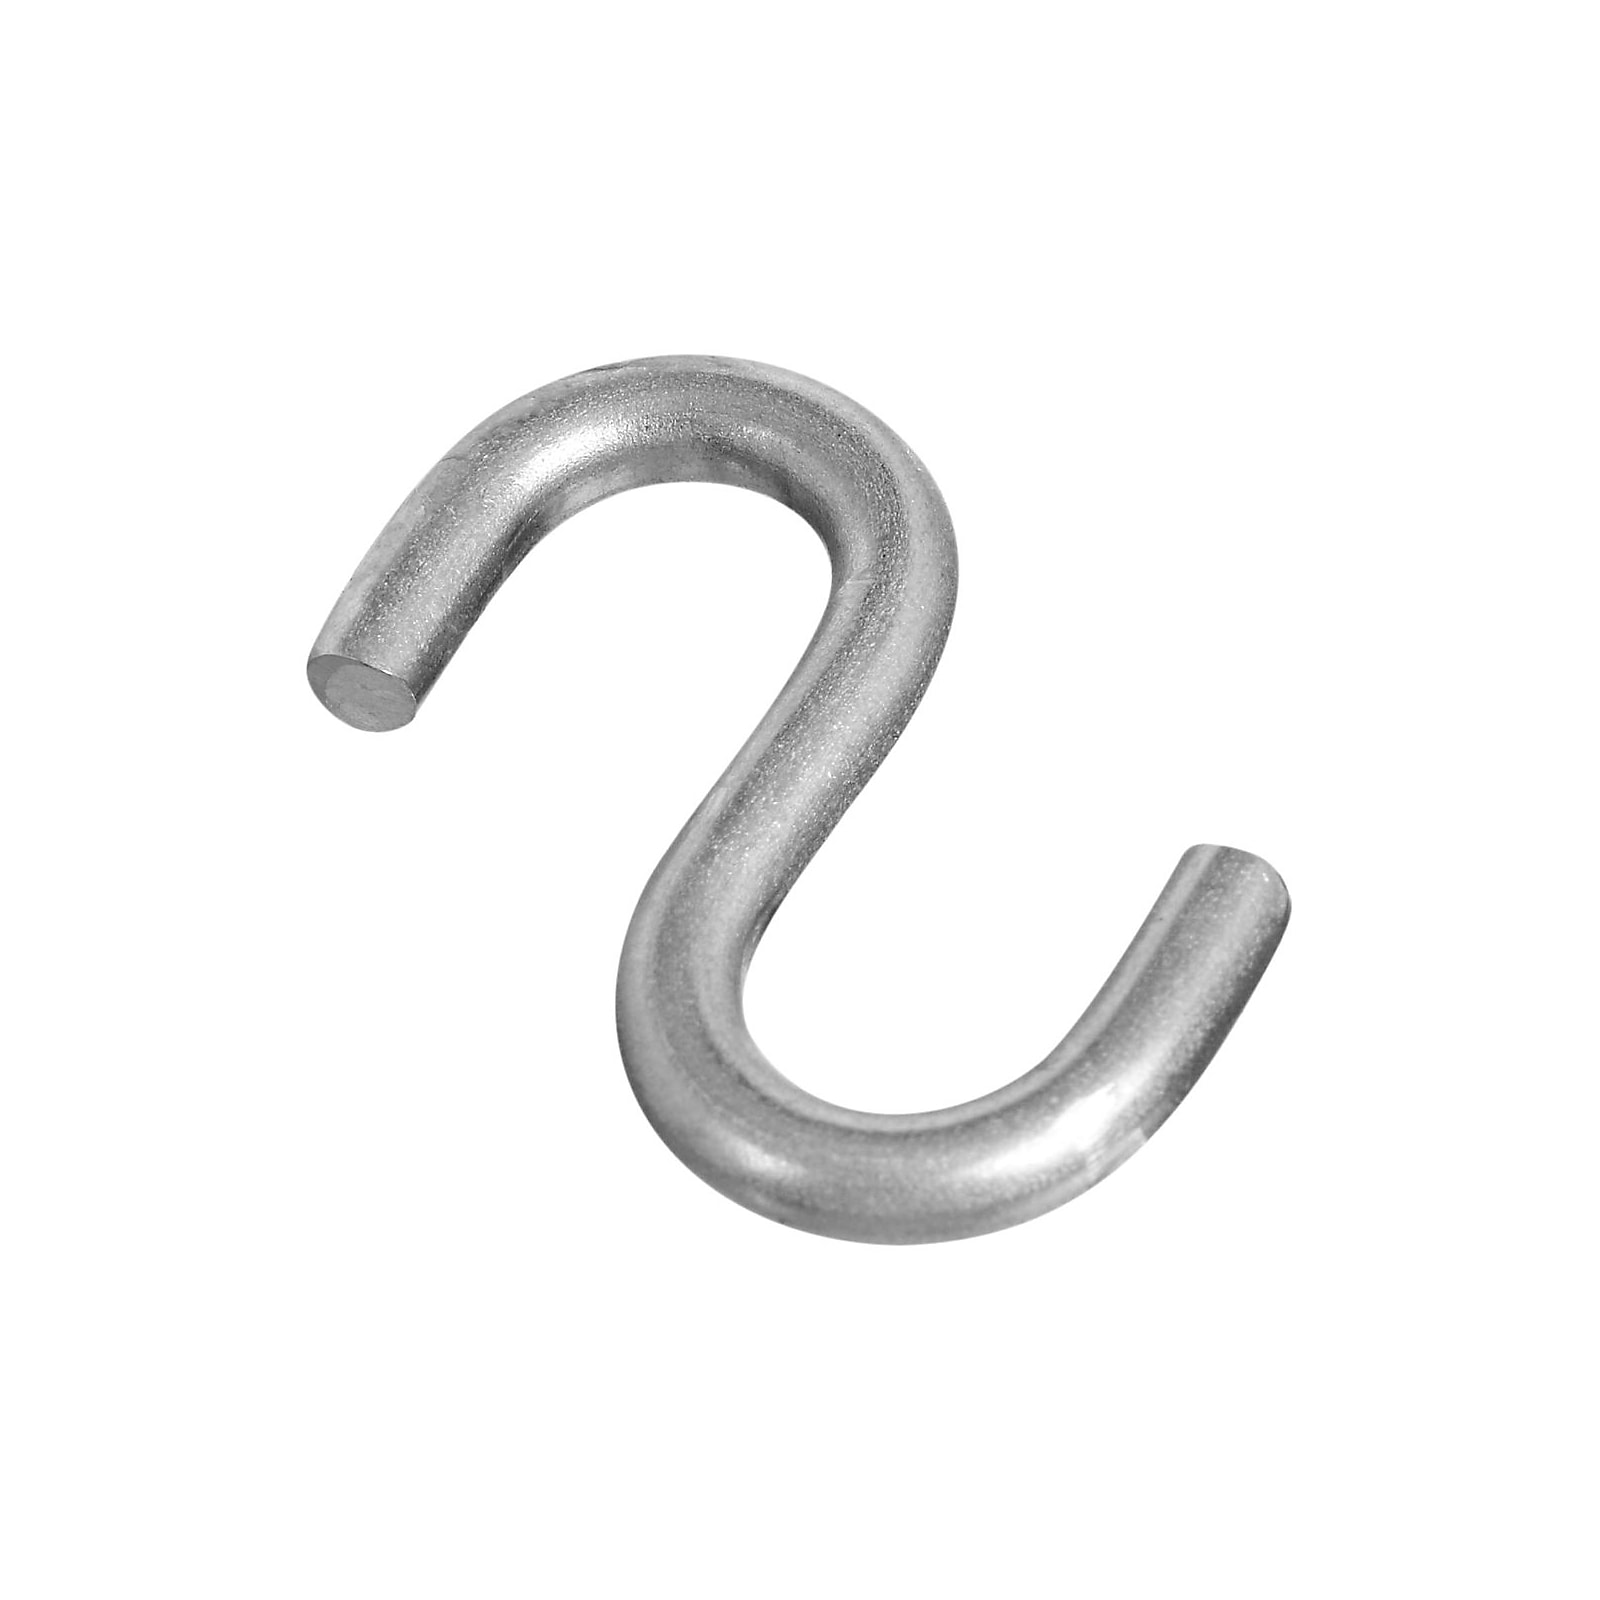 Stainless steel Hooks at